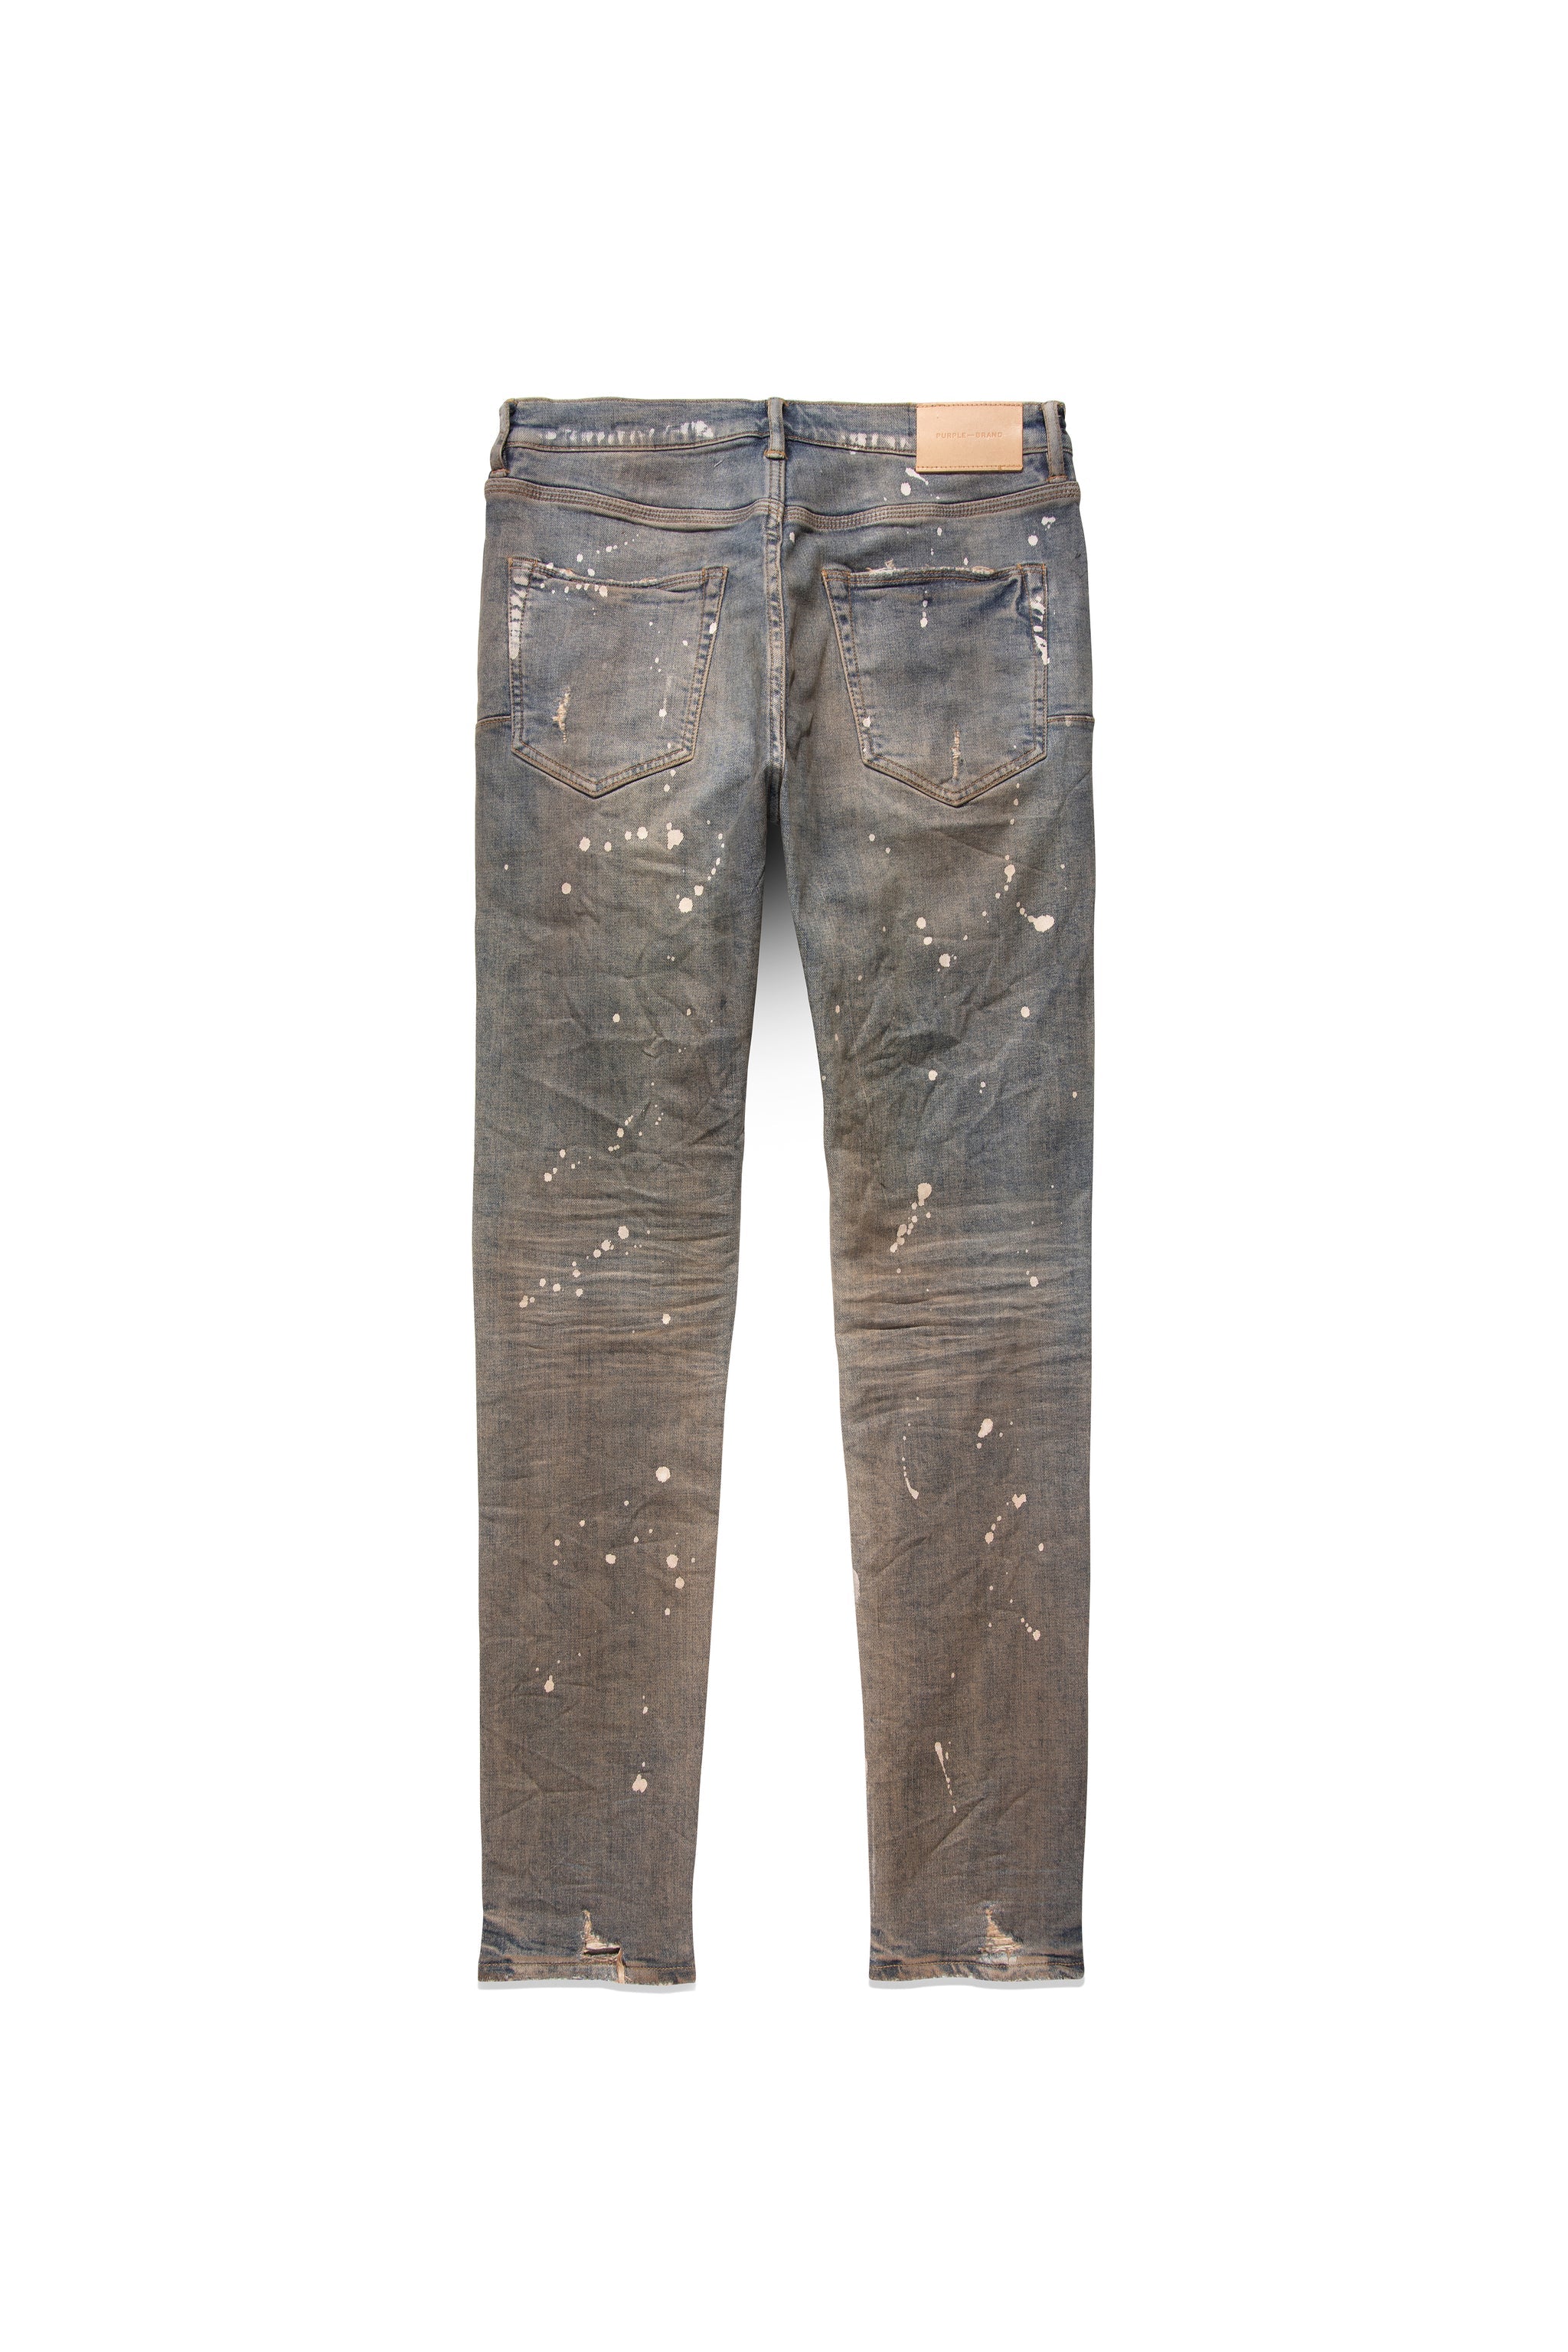 P001 LOW RISE SKINNY JEAN - Multicolor Spray Over Bleached Indigo